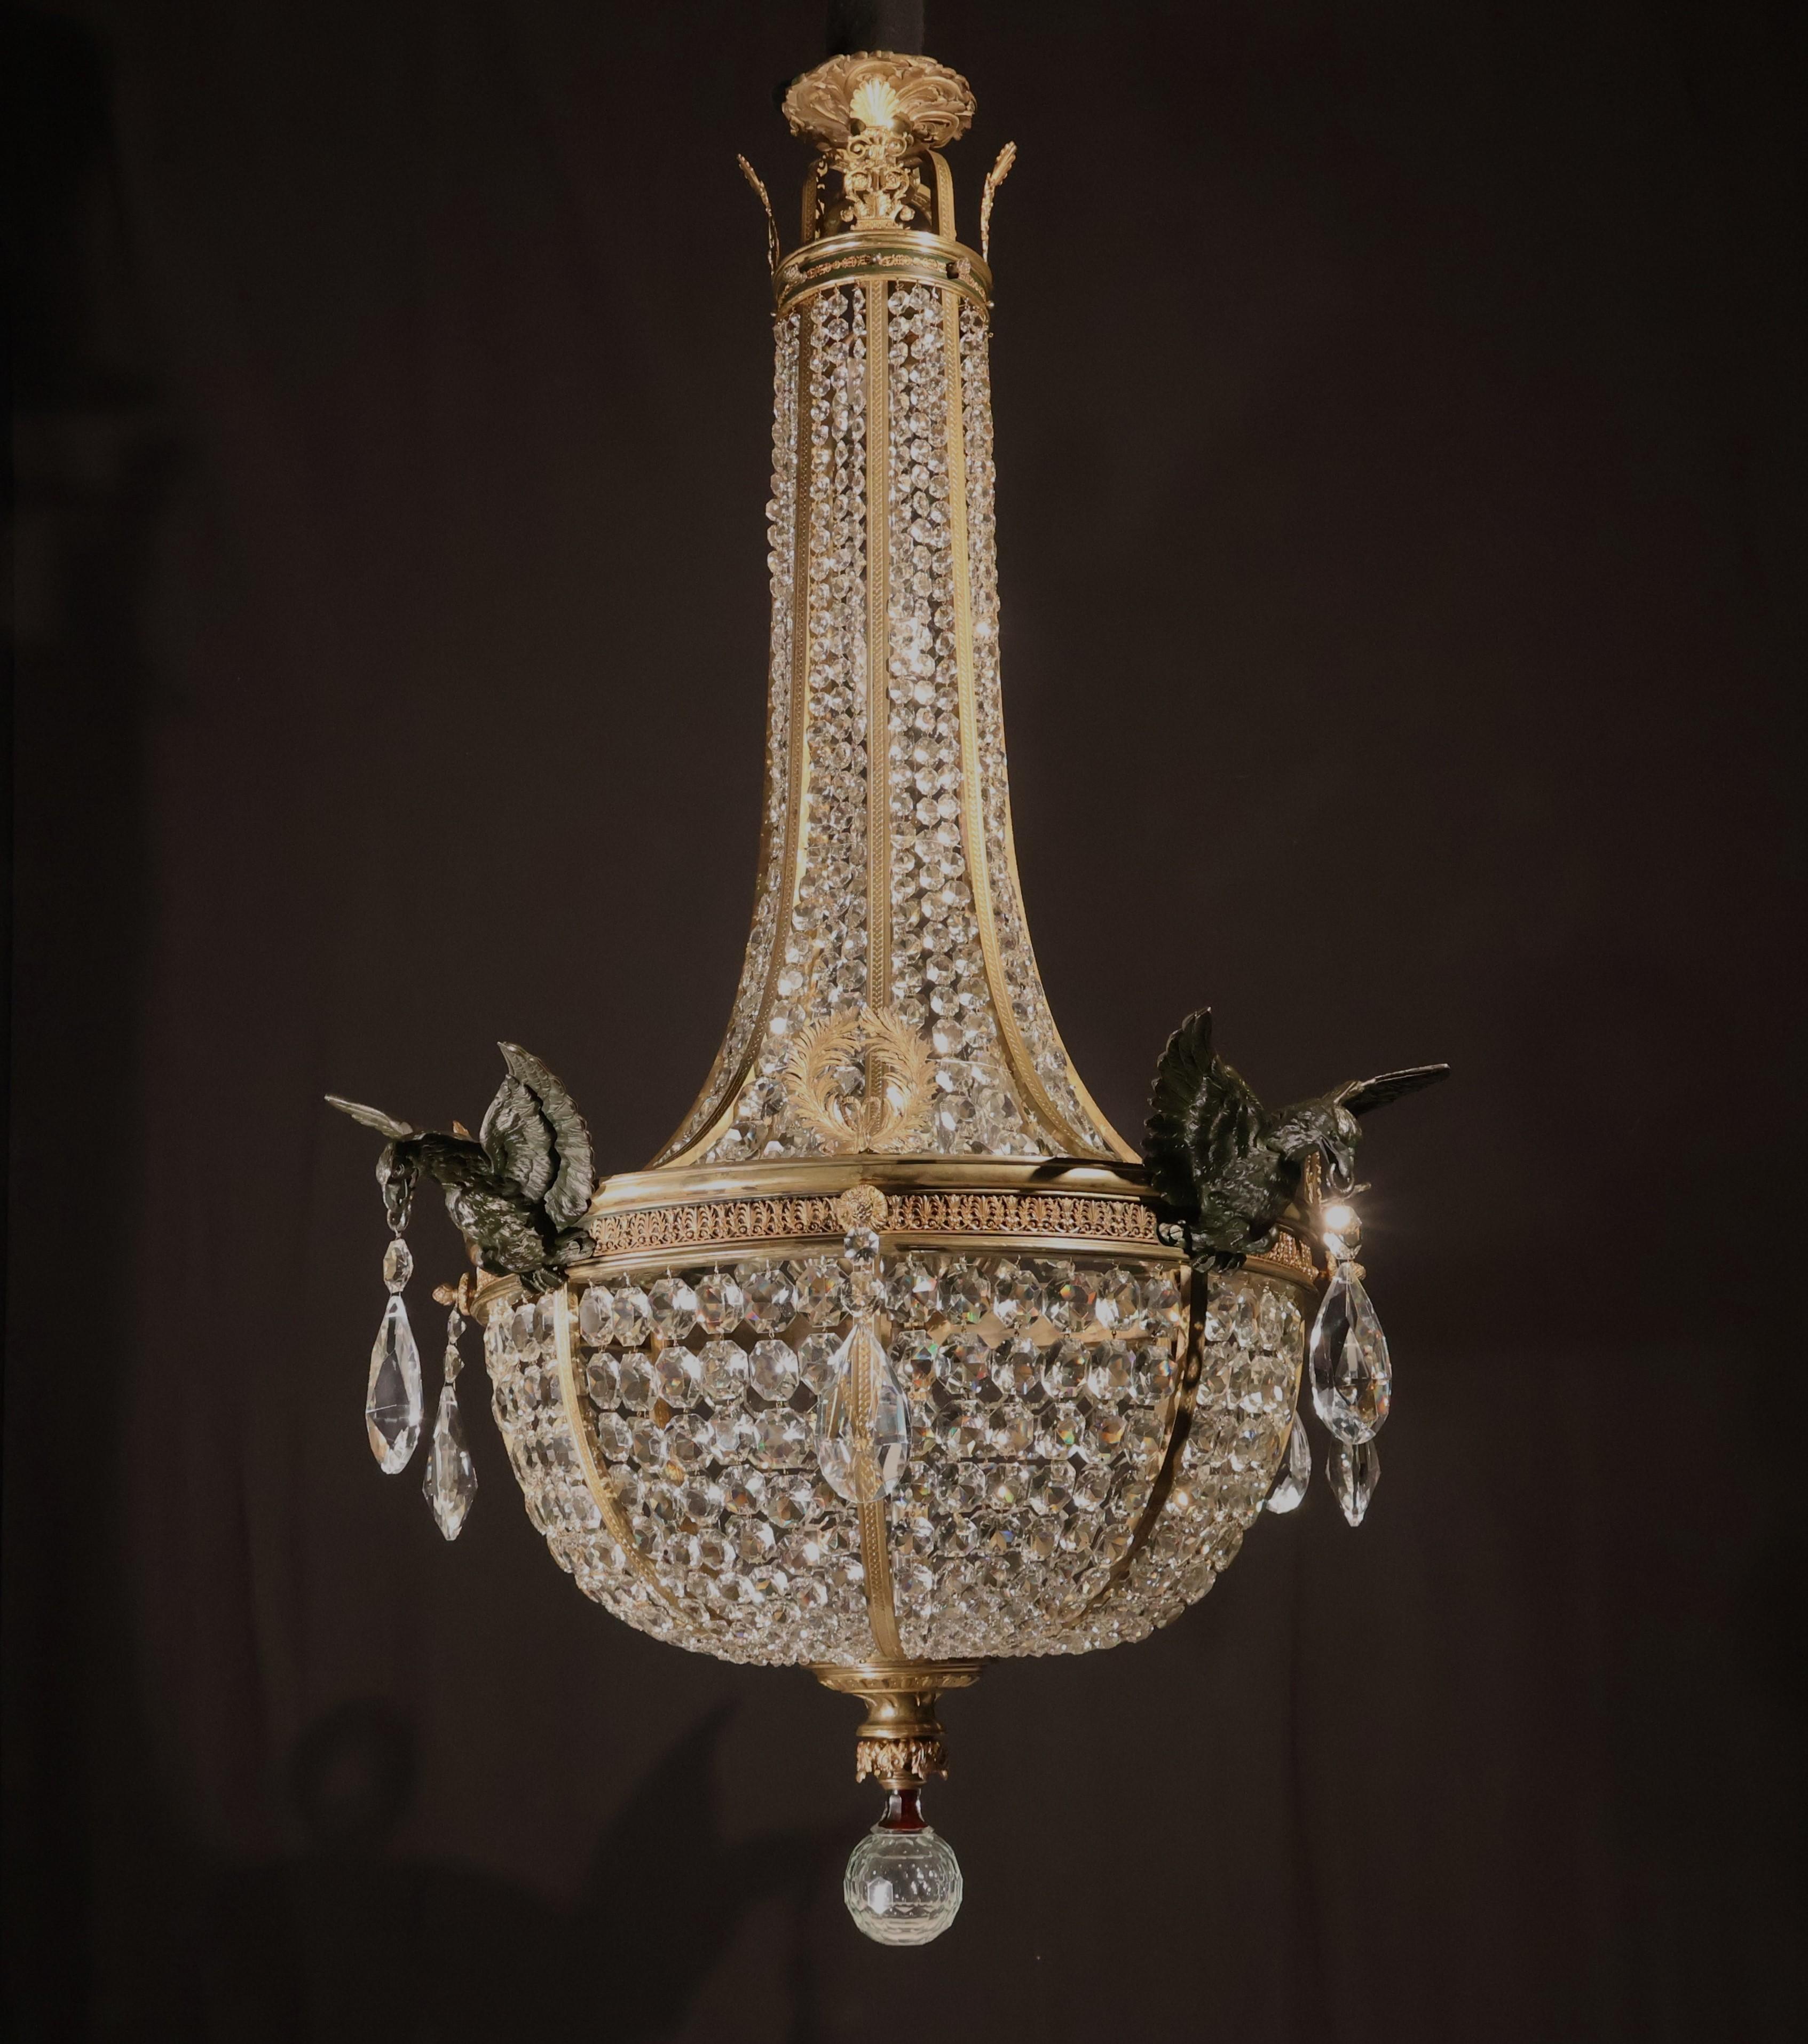 A Very Fine & Impressive Gilt Bronze & Crystal Basket Chandelier in the Empire style, featuring four patinated bronze eagle figures. 
France, circa 1900. 10 lights. 
Dimensions: Height 64